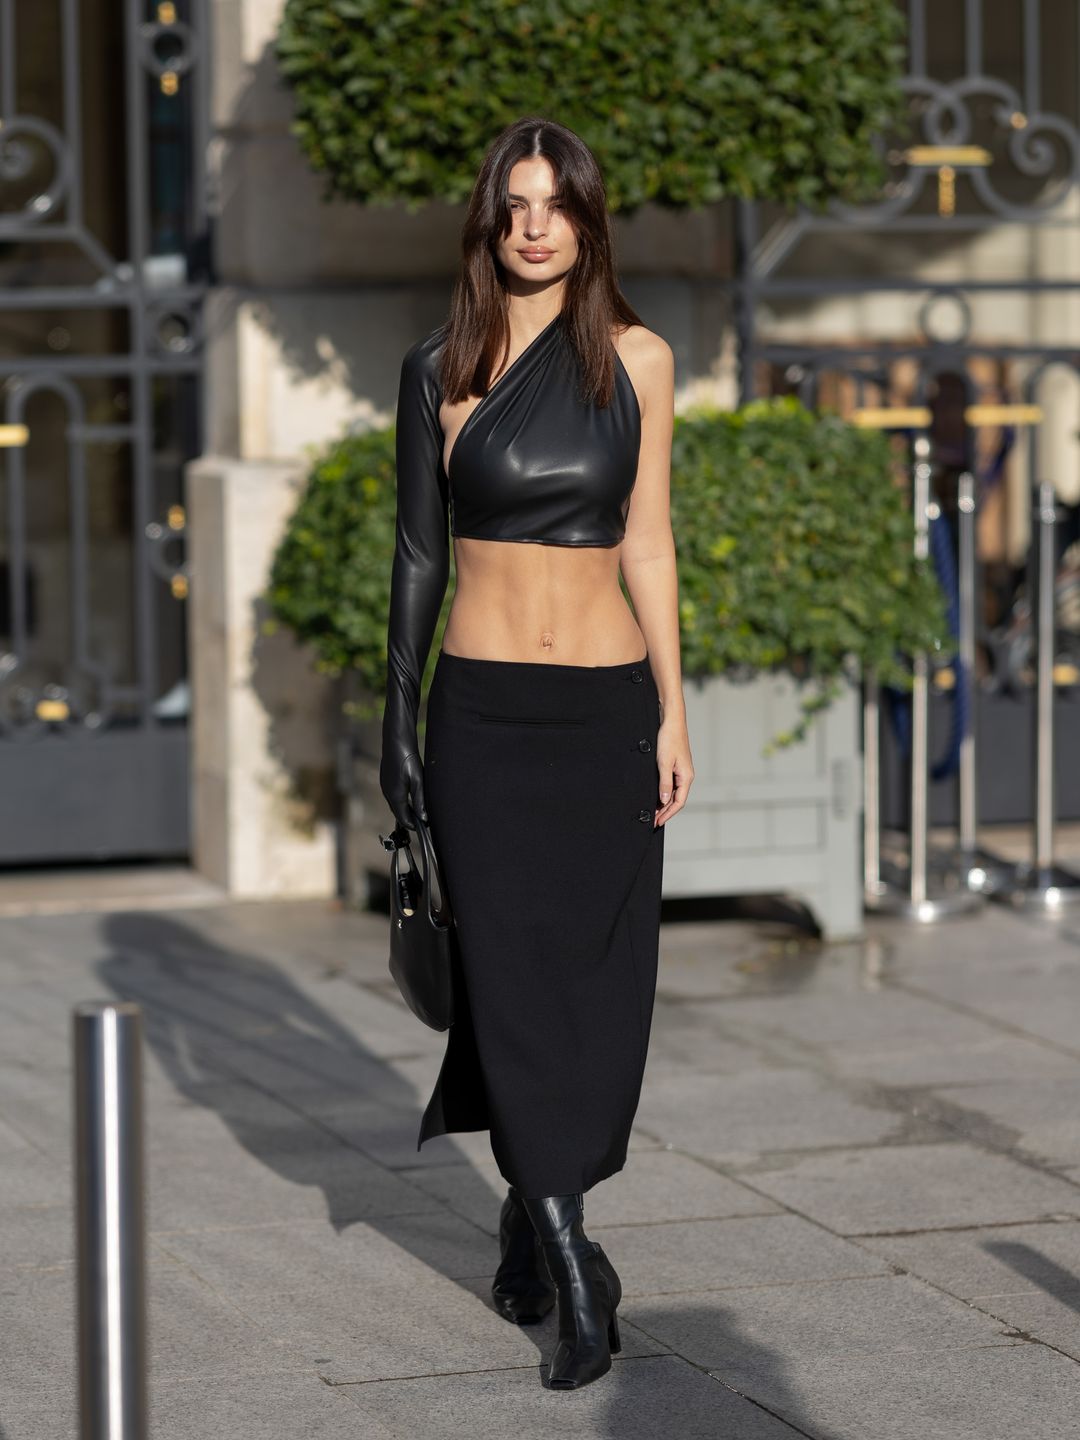 Emily Ratajkowski is seen heading to the Courreges show in a low rise black skirt and black crop top